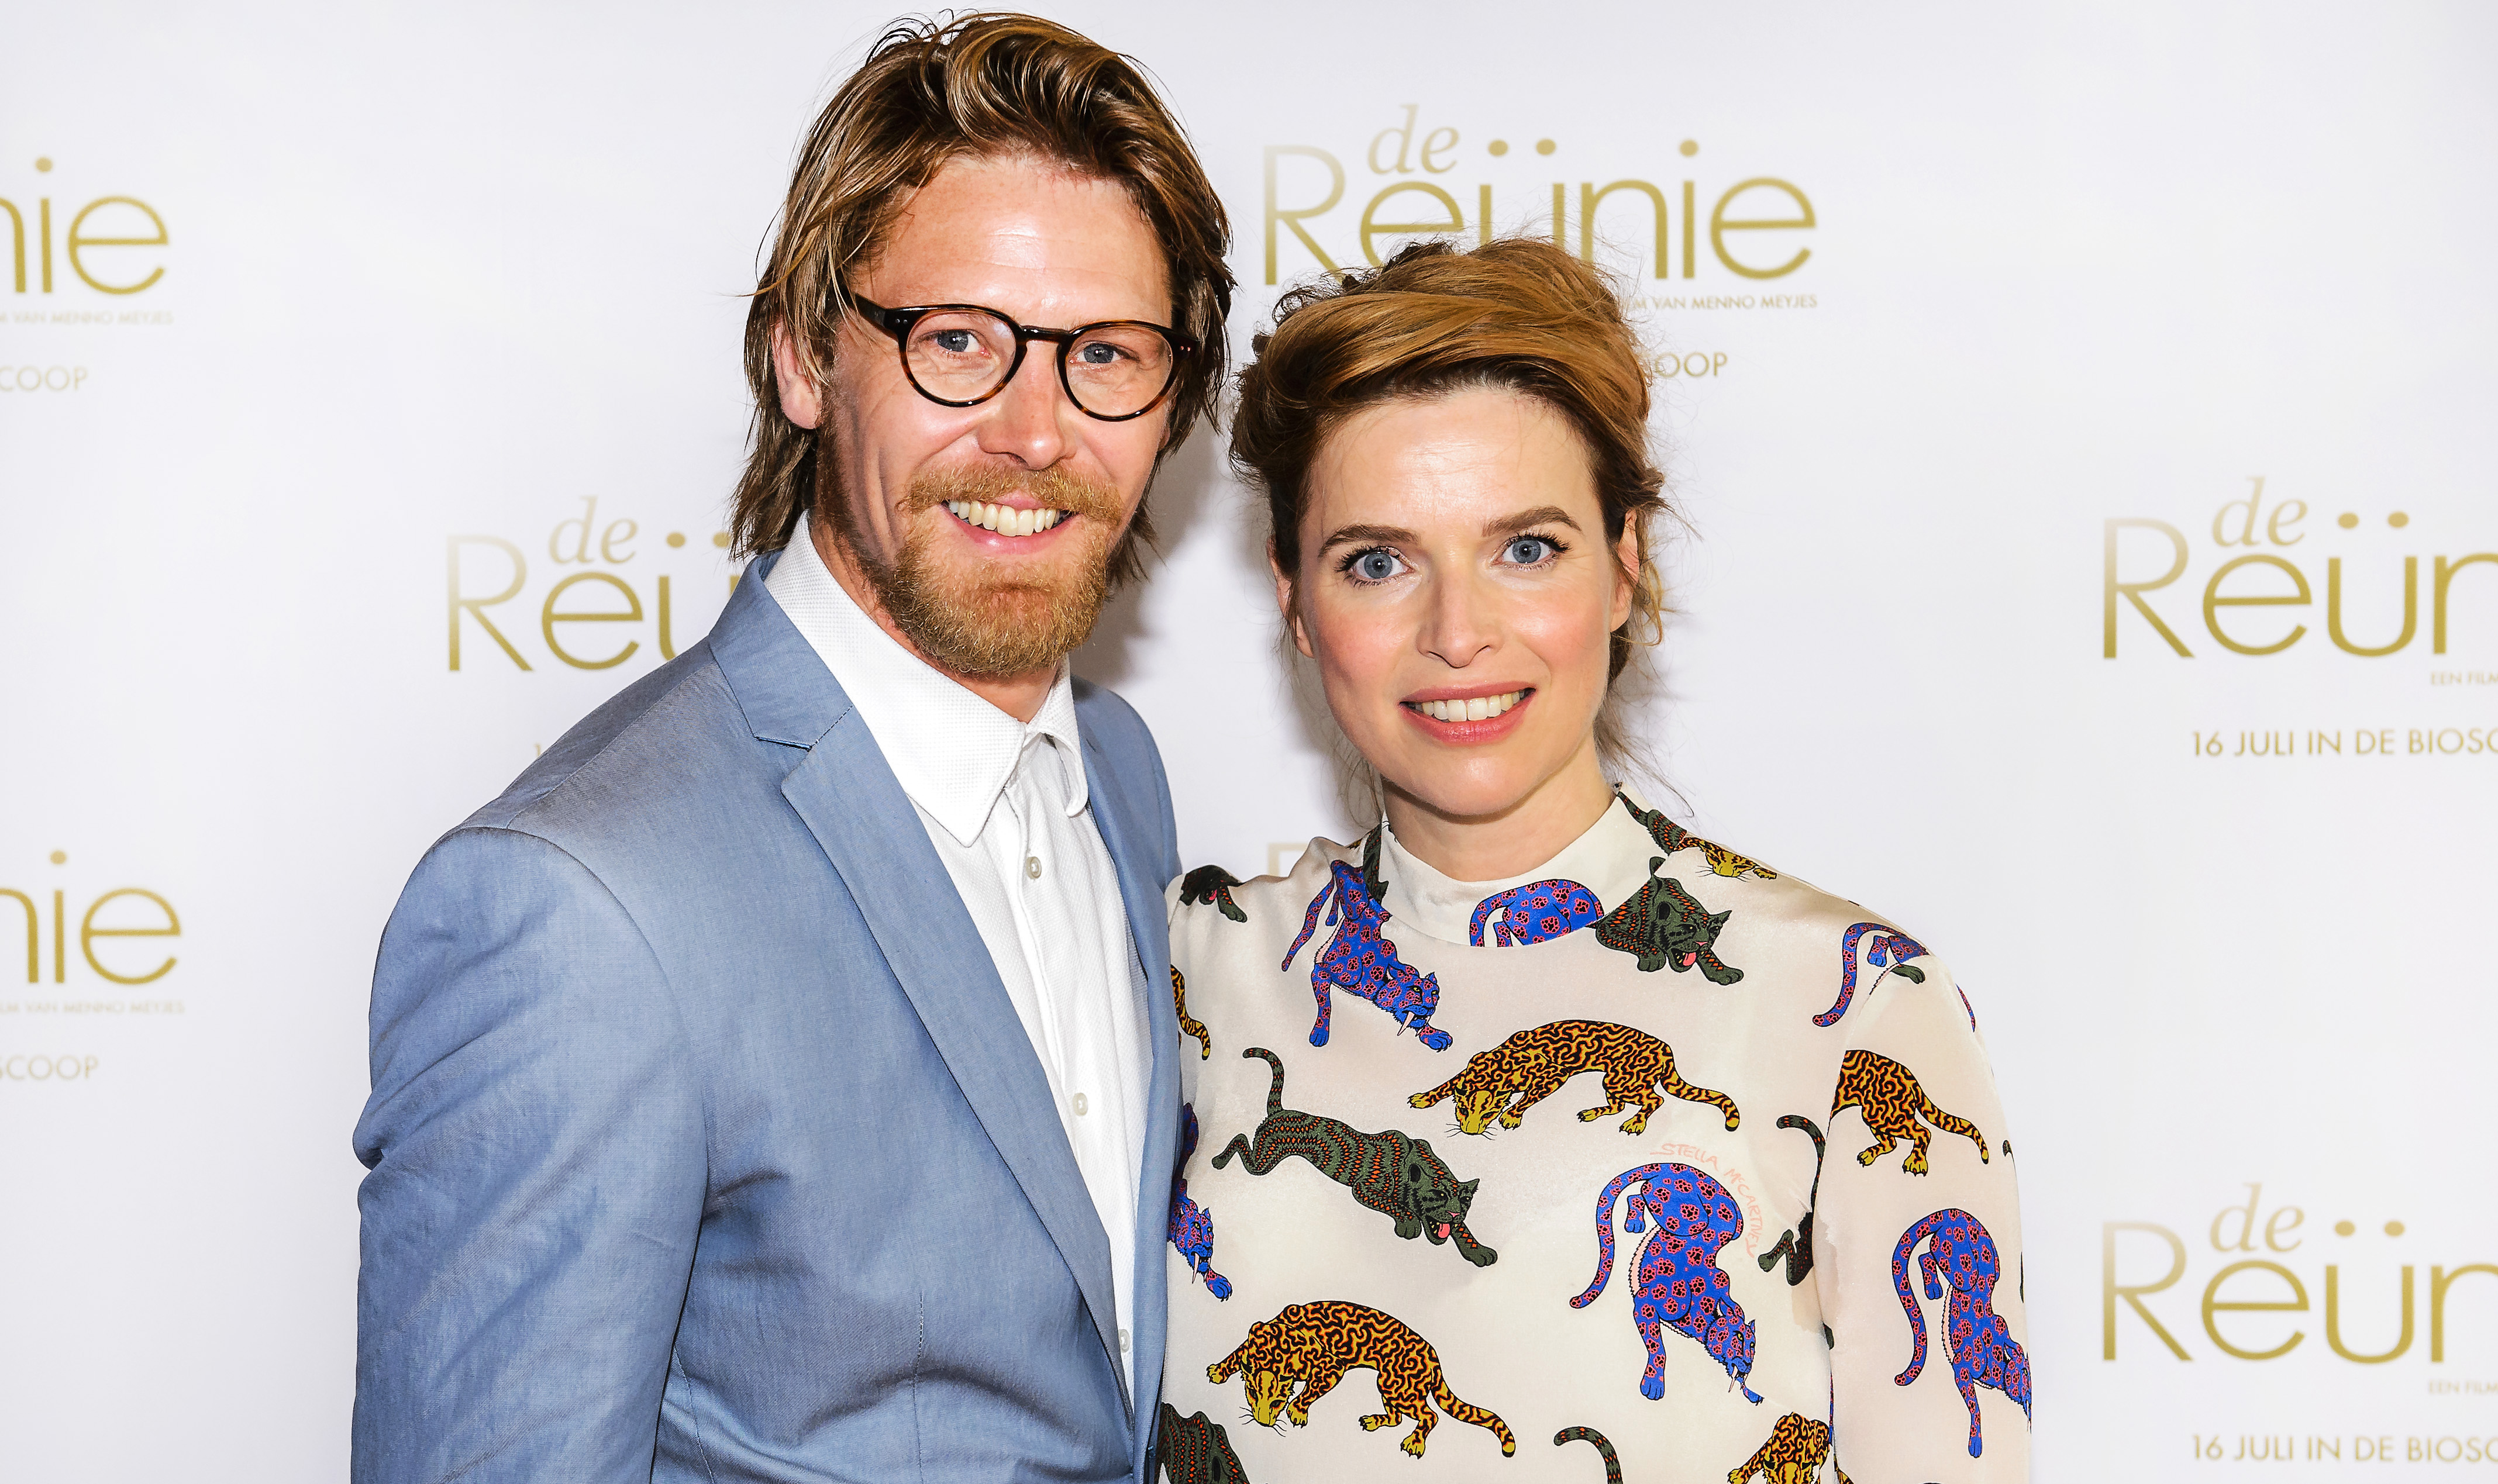 Dutch Actress, Thekla Reuten is in a long relationship with Gijs Naber